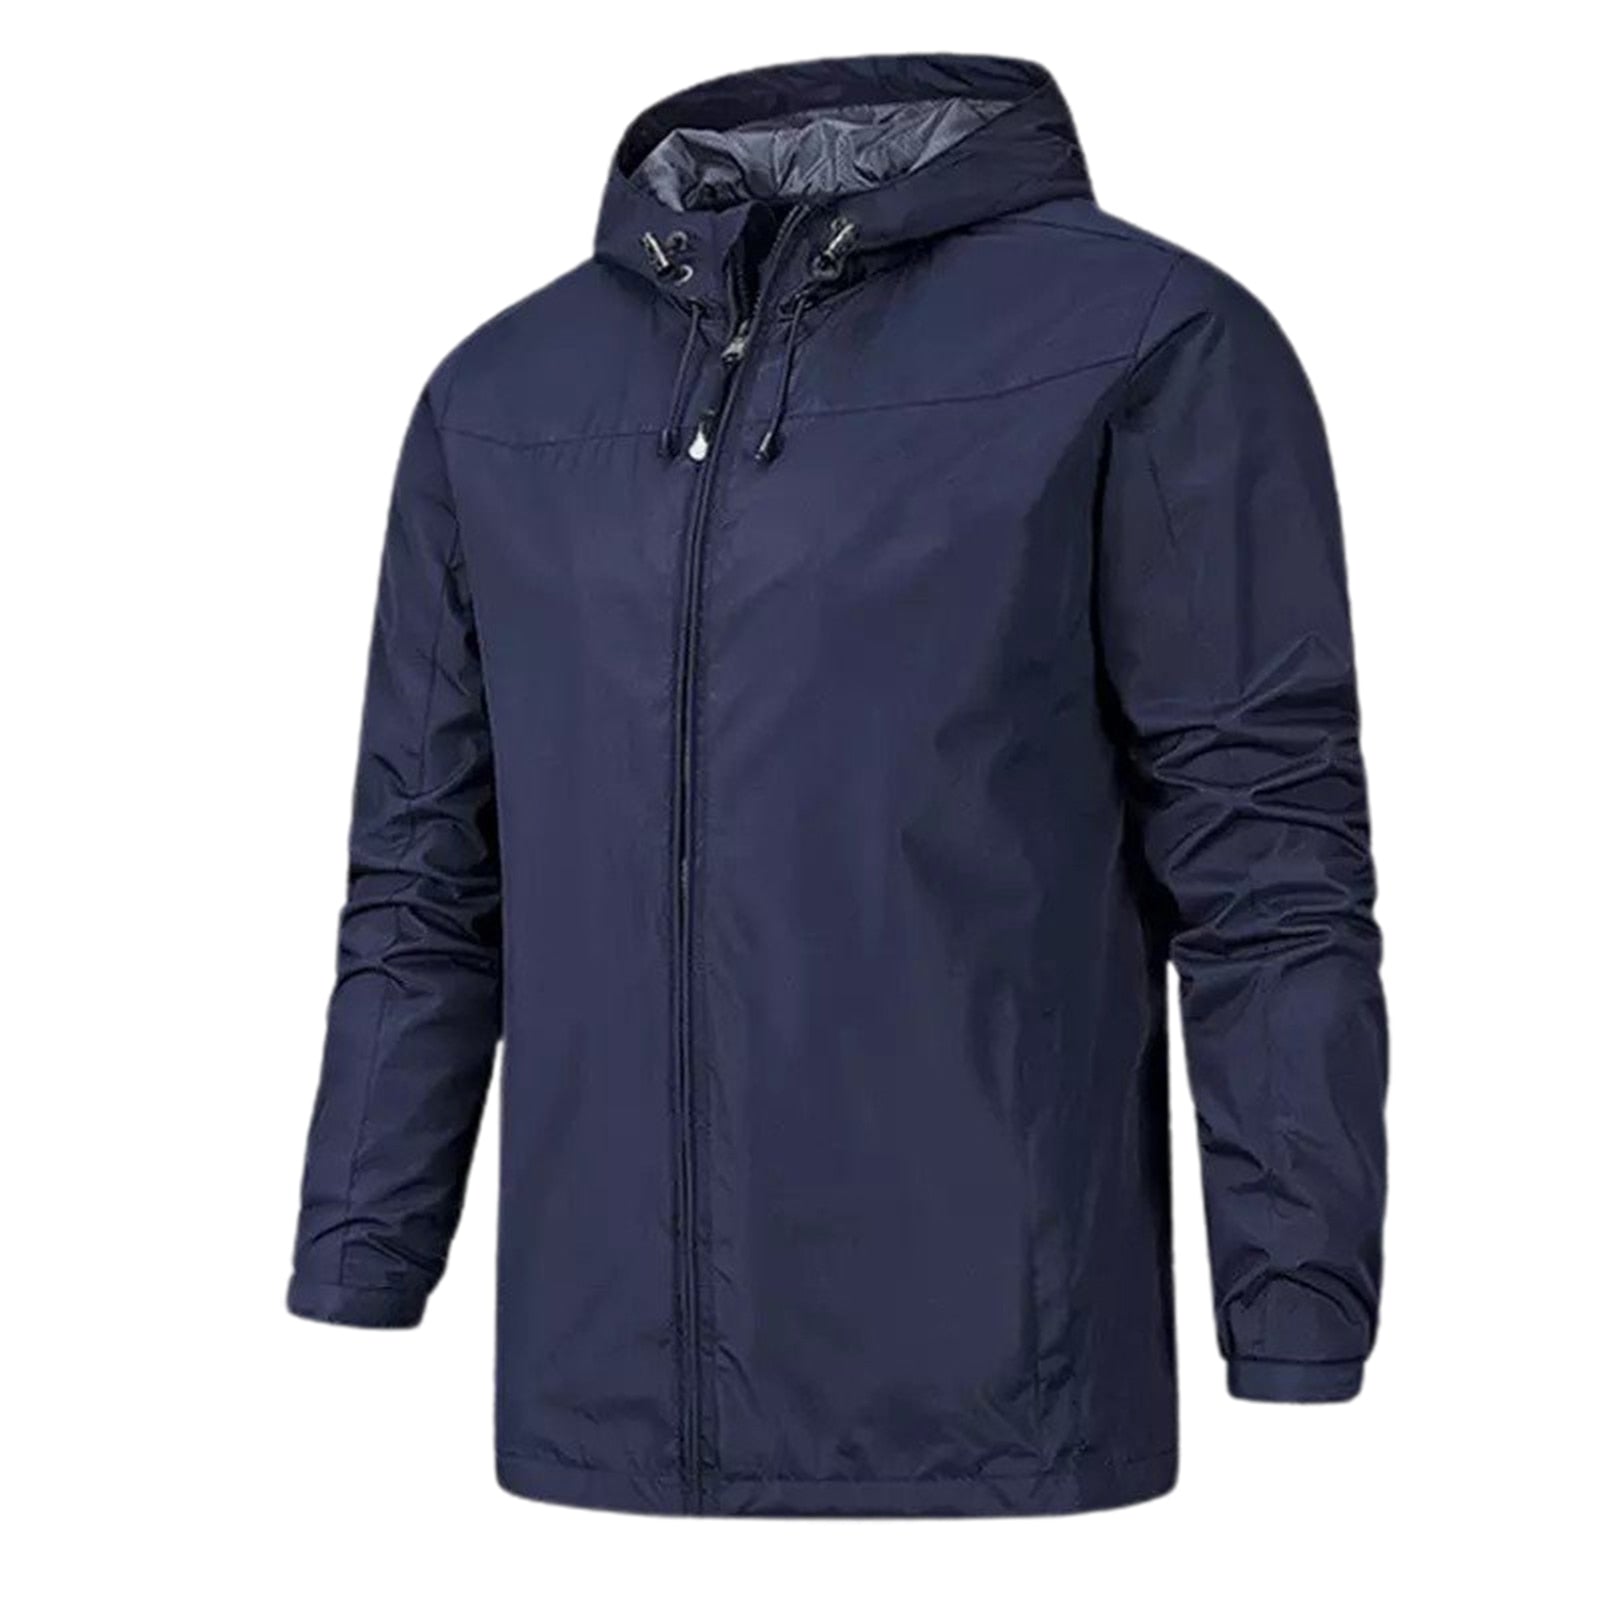 Unisex Waterproof Jacket - Chief Outfitters